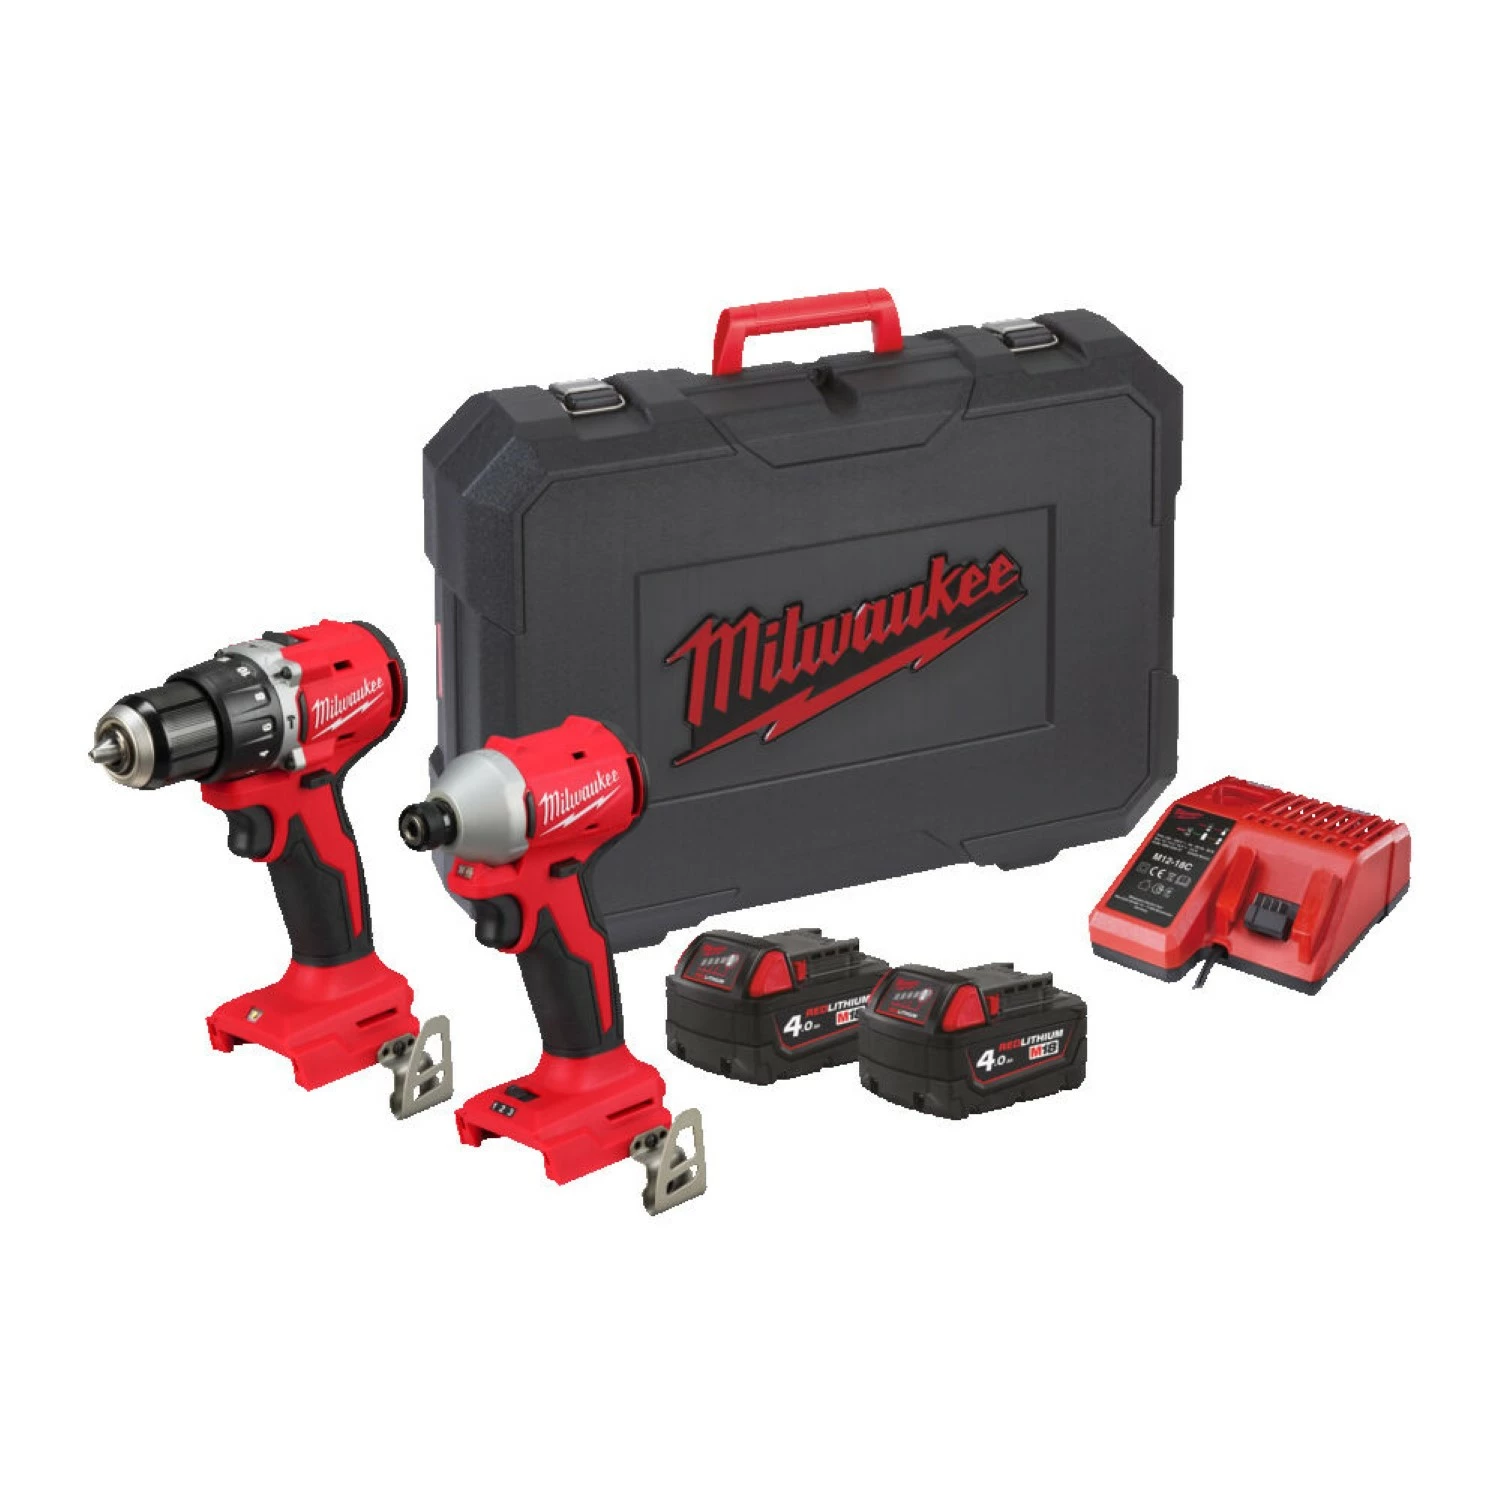 Milwaukee M18 BLCPP2A-402C  Compact Brushless Hammer Drill + Compact Brushless Impact Drill (2x 4.0Ah accu)-image